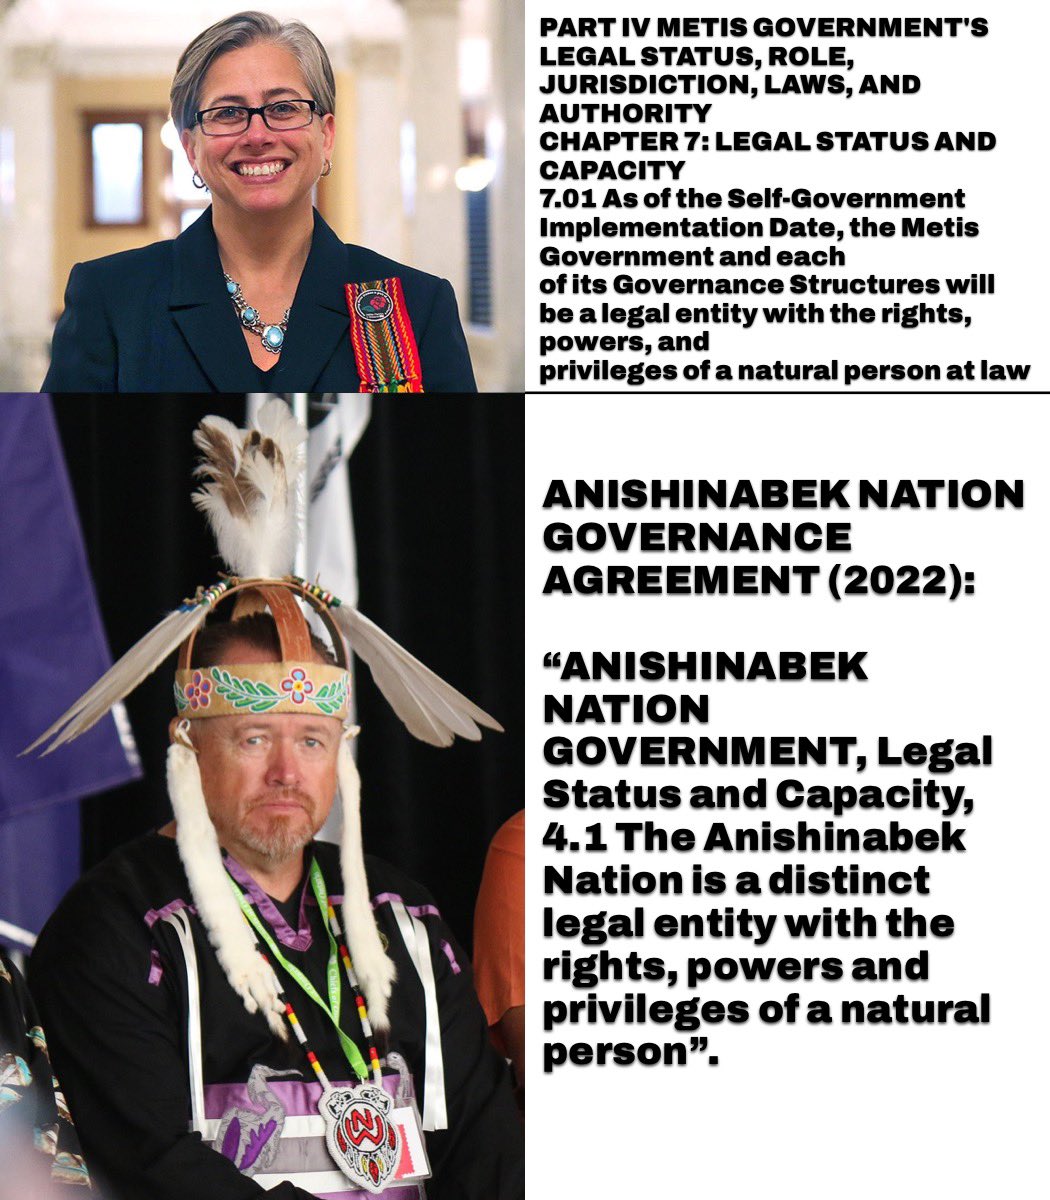 @AylanX For past 8 years Trudeau gov’t has been implementing its pan-Indigenous approach 2 “Reconciliation”-dissolving Dept. of Indian Affairs, passing “Indigenous” legislation, creating 2 “Indigenous” Depts. AFN, COO, UOI & your Band has gone along with it, so it’s a little to cry IMO!